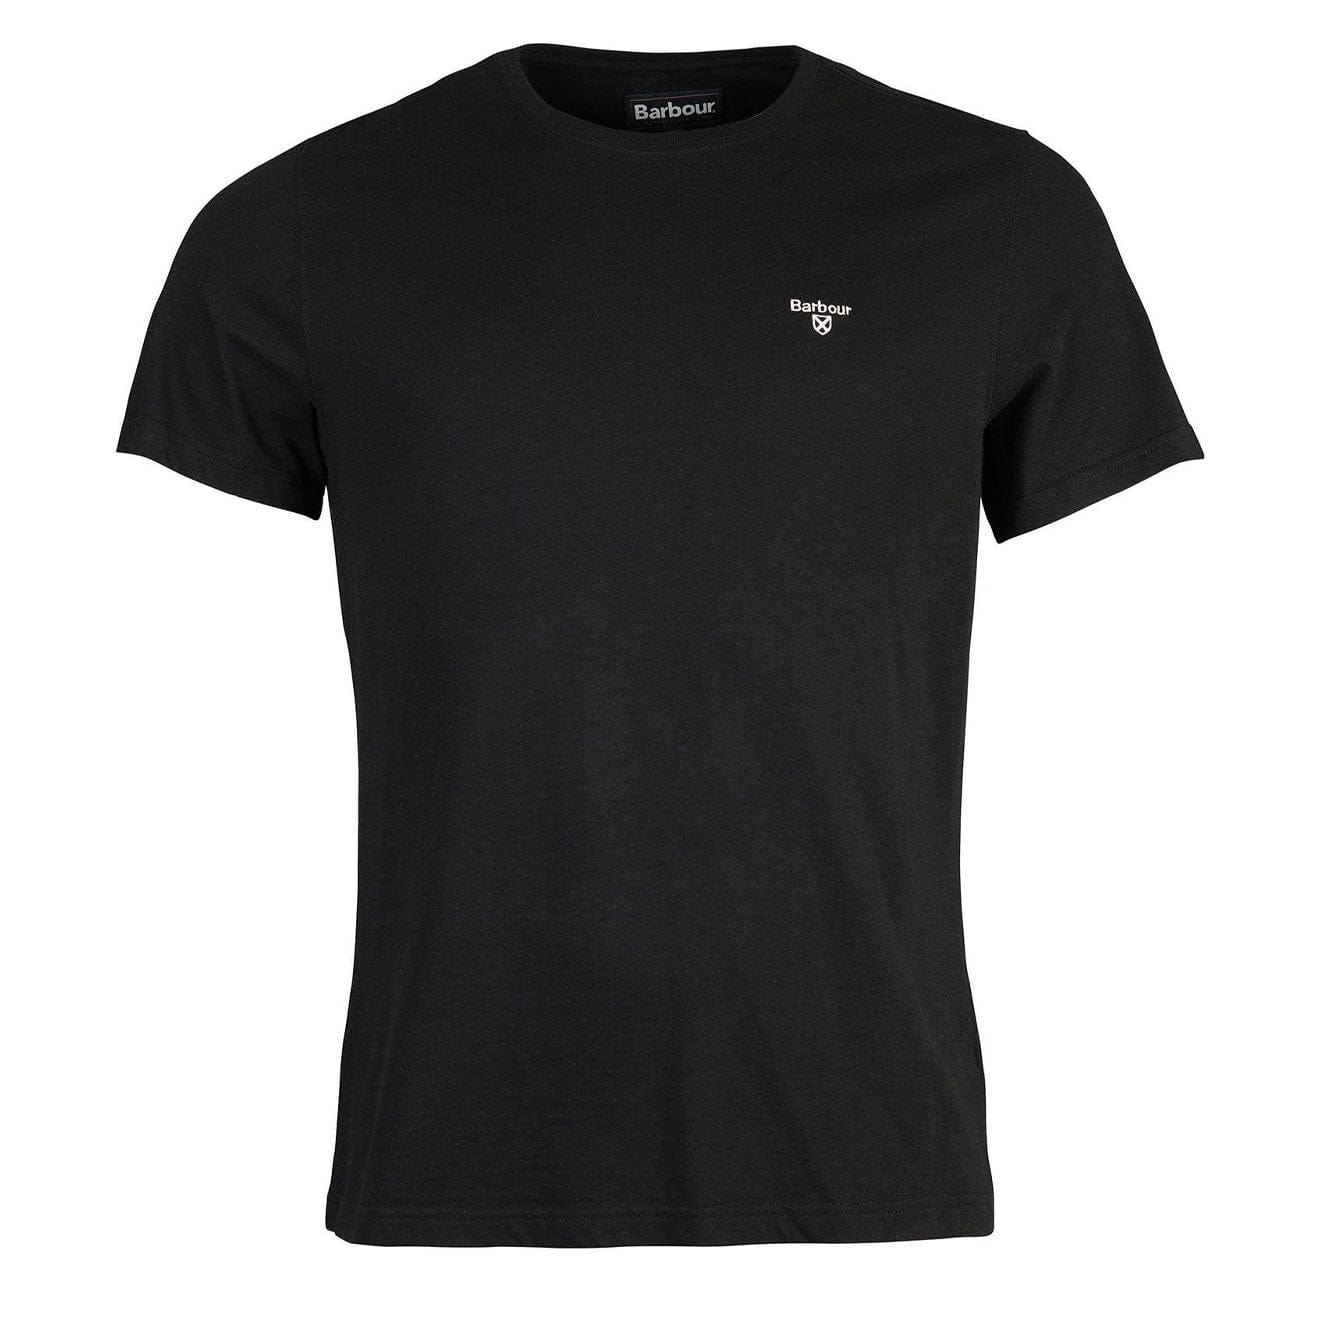 Barbour Sports T-Shirt Black | The Sporting Lodge